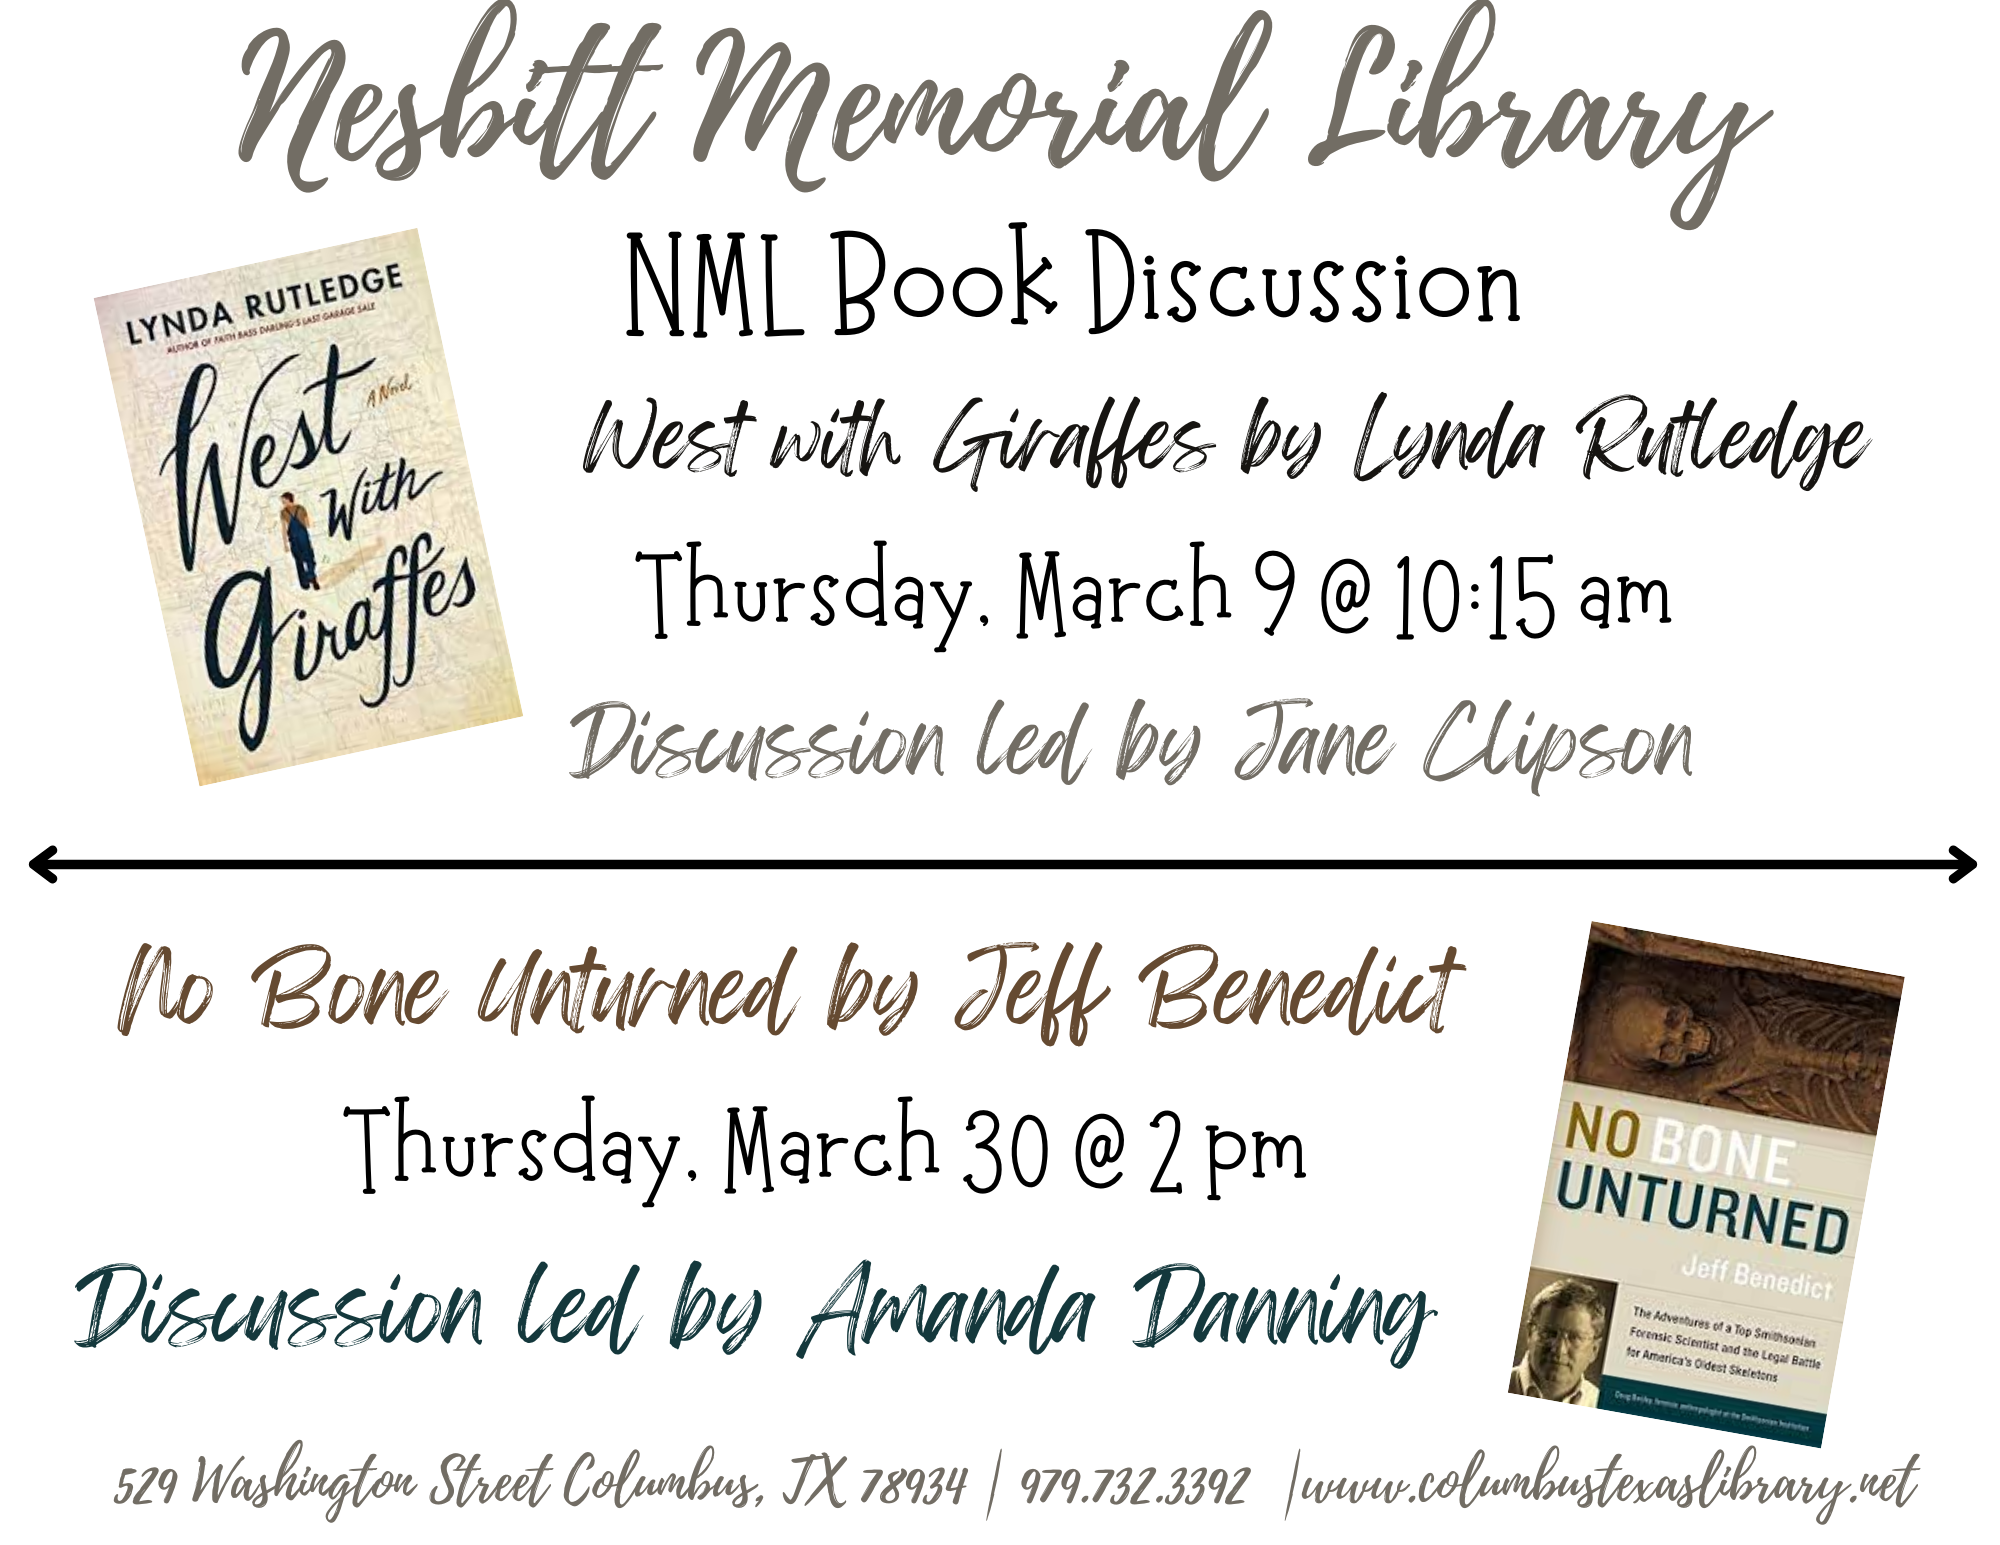 NML Book Discussions Mar 9th at 10:15am & Mar 30th at 2pm